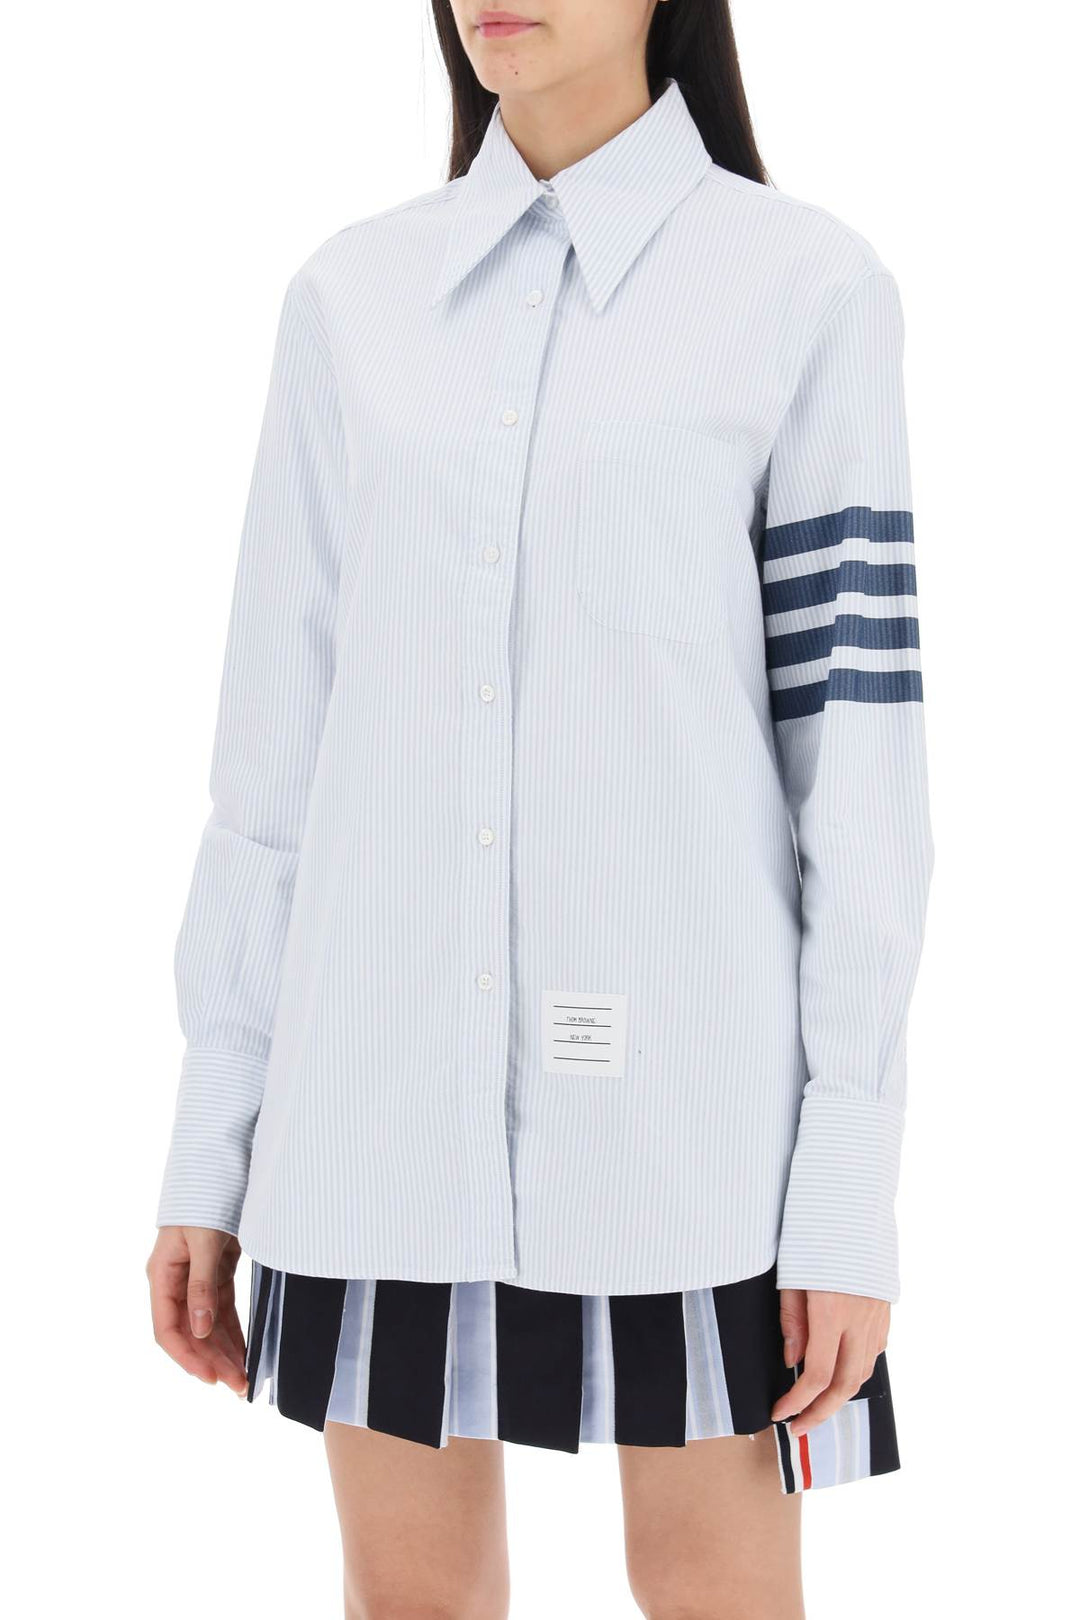 Thom Browne Striped Oxford Shirt With Pointed Collar   Bianco